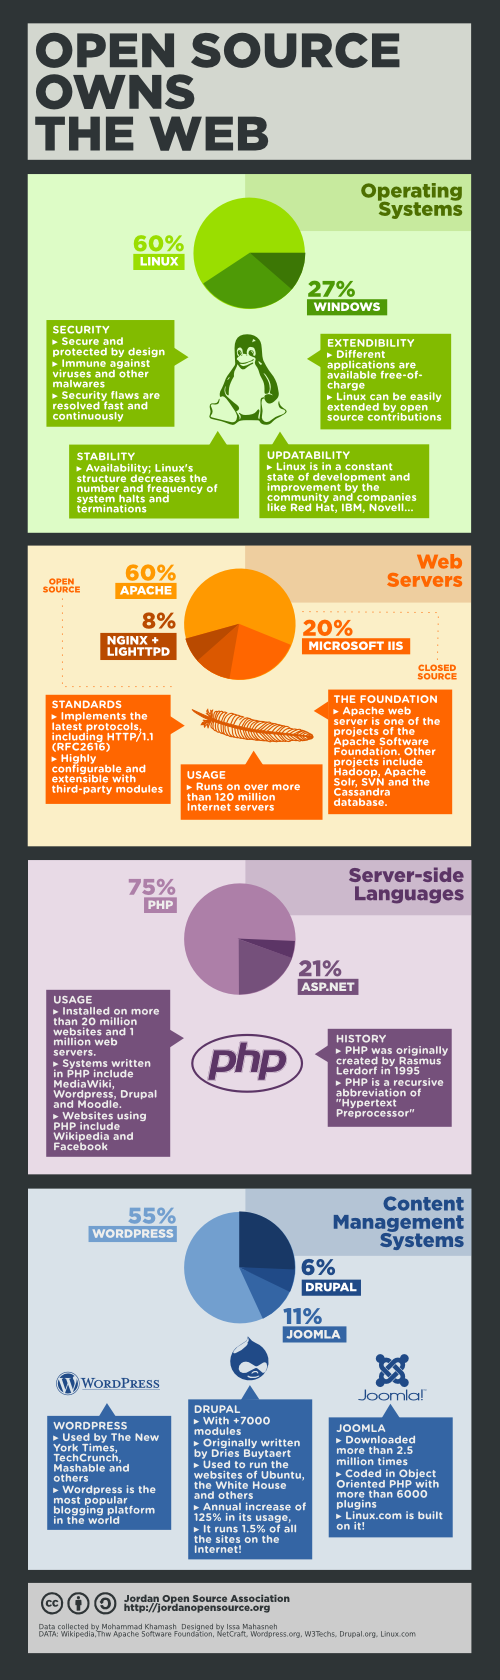 Open Source Owns The Web | Infographic